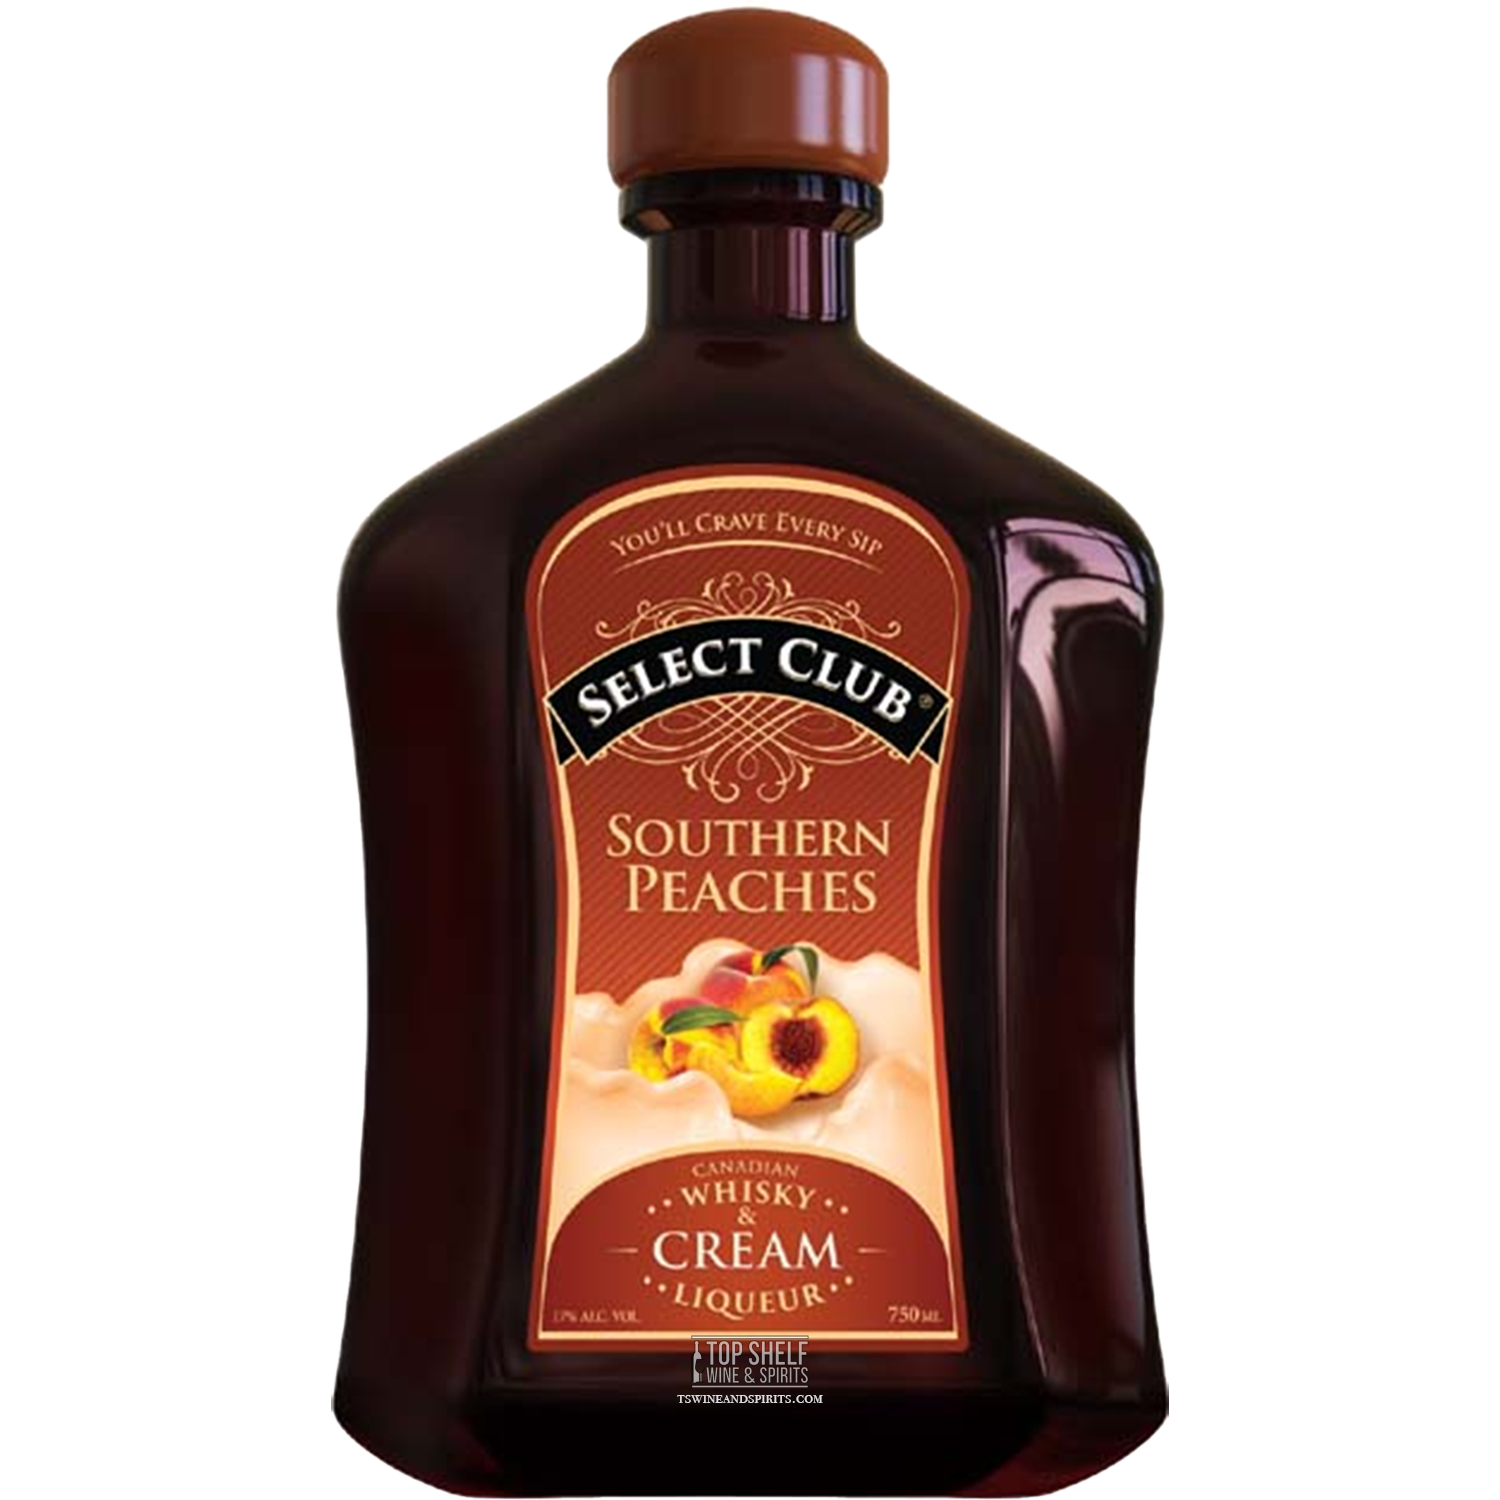 Select Club Southern Peaches Whisky and Cream